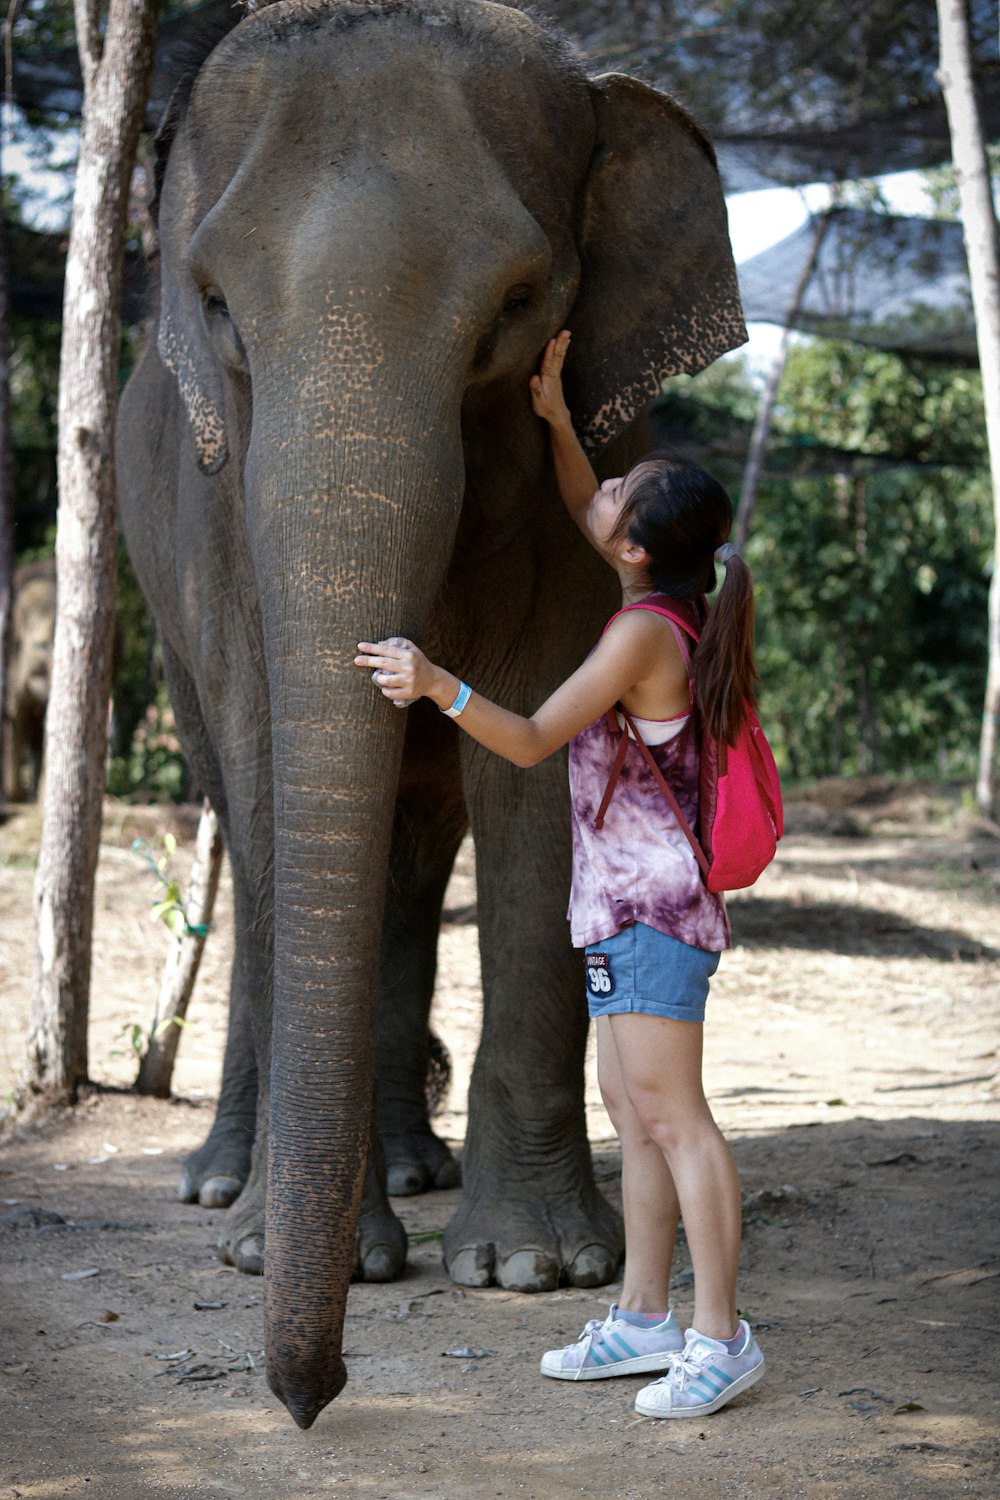 girl in pink tank top and blue shorts standing beside elephant during daytime